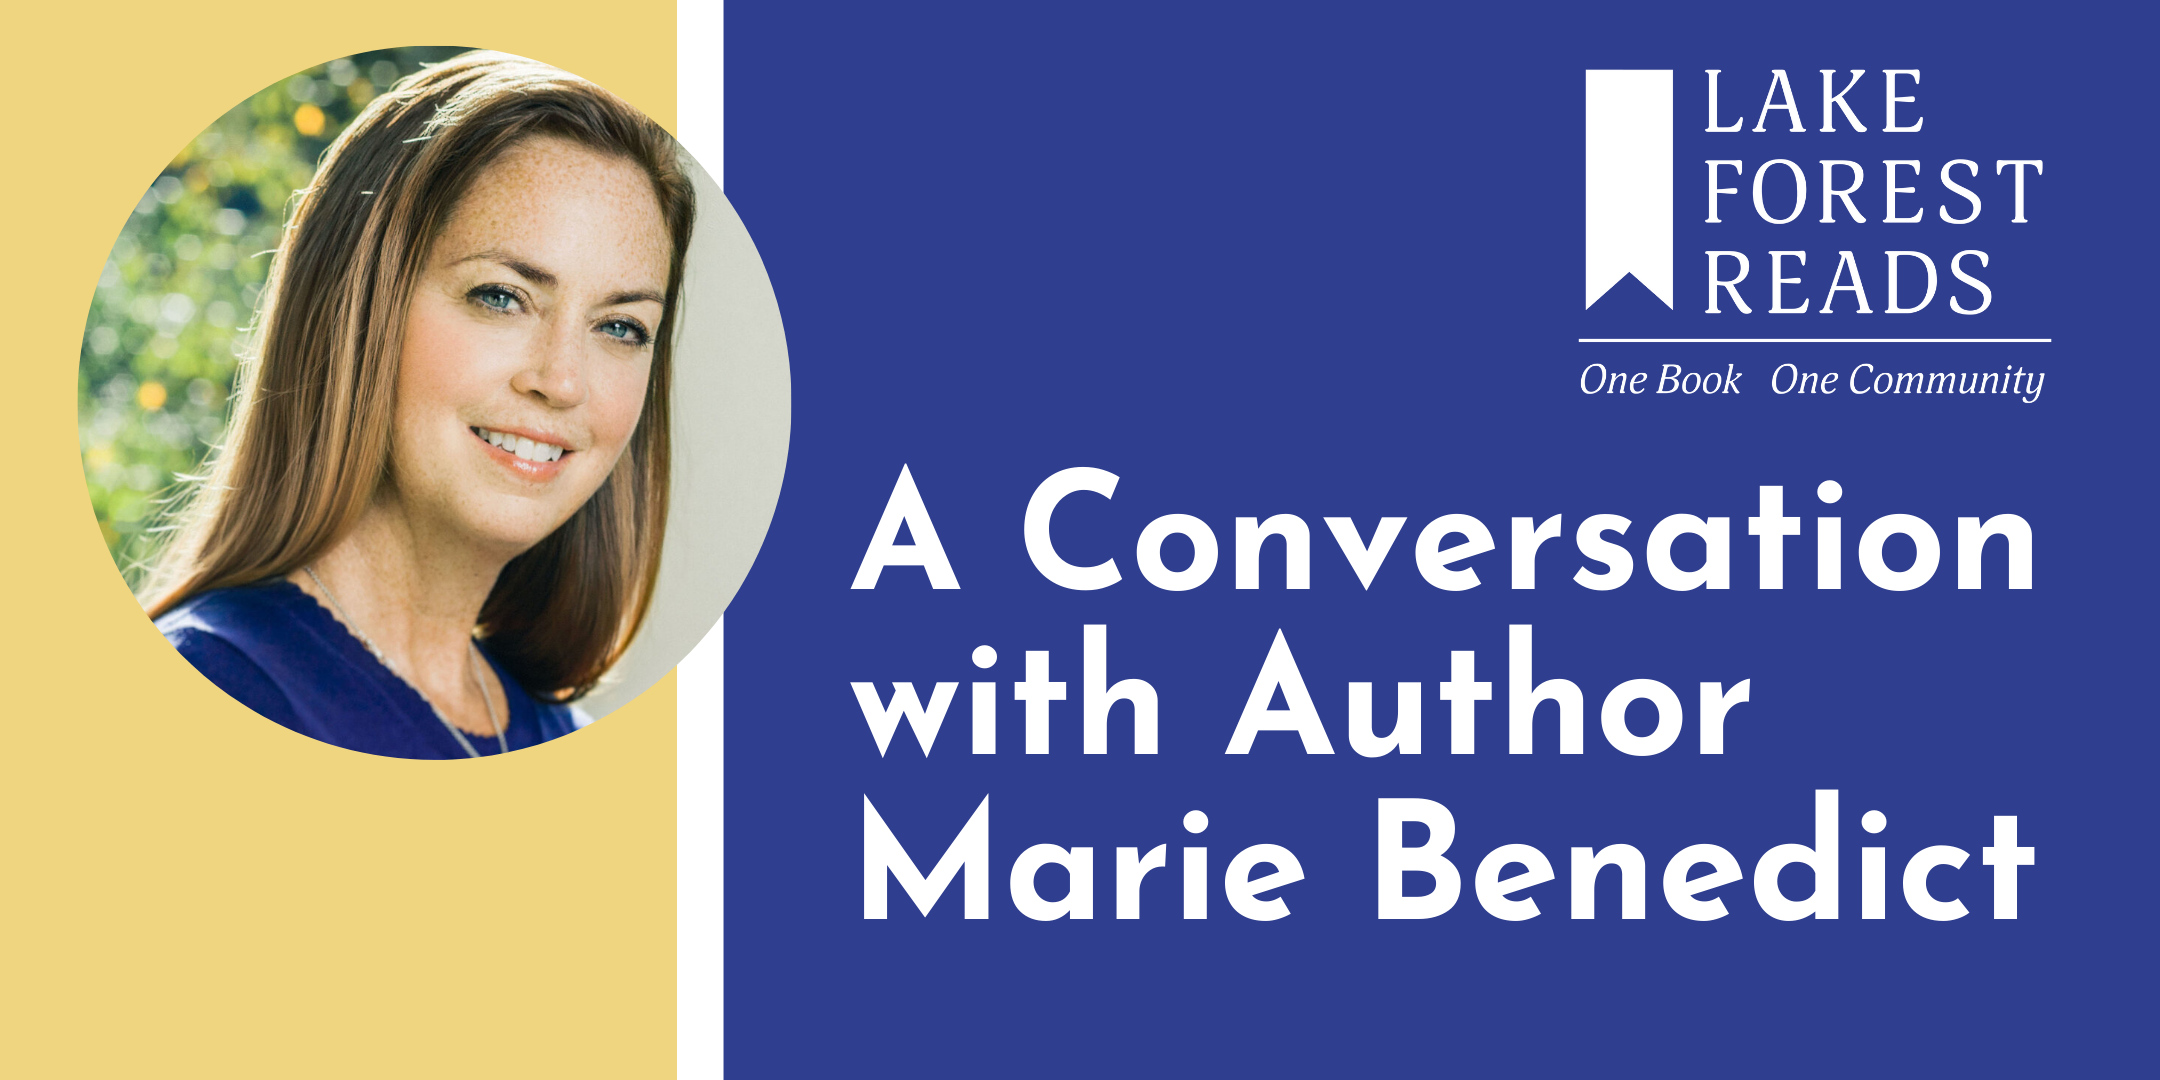 image of "A Conversation with Author Marie Benedict"